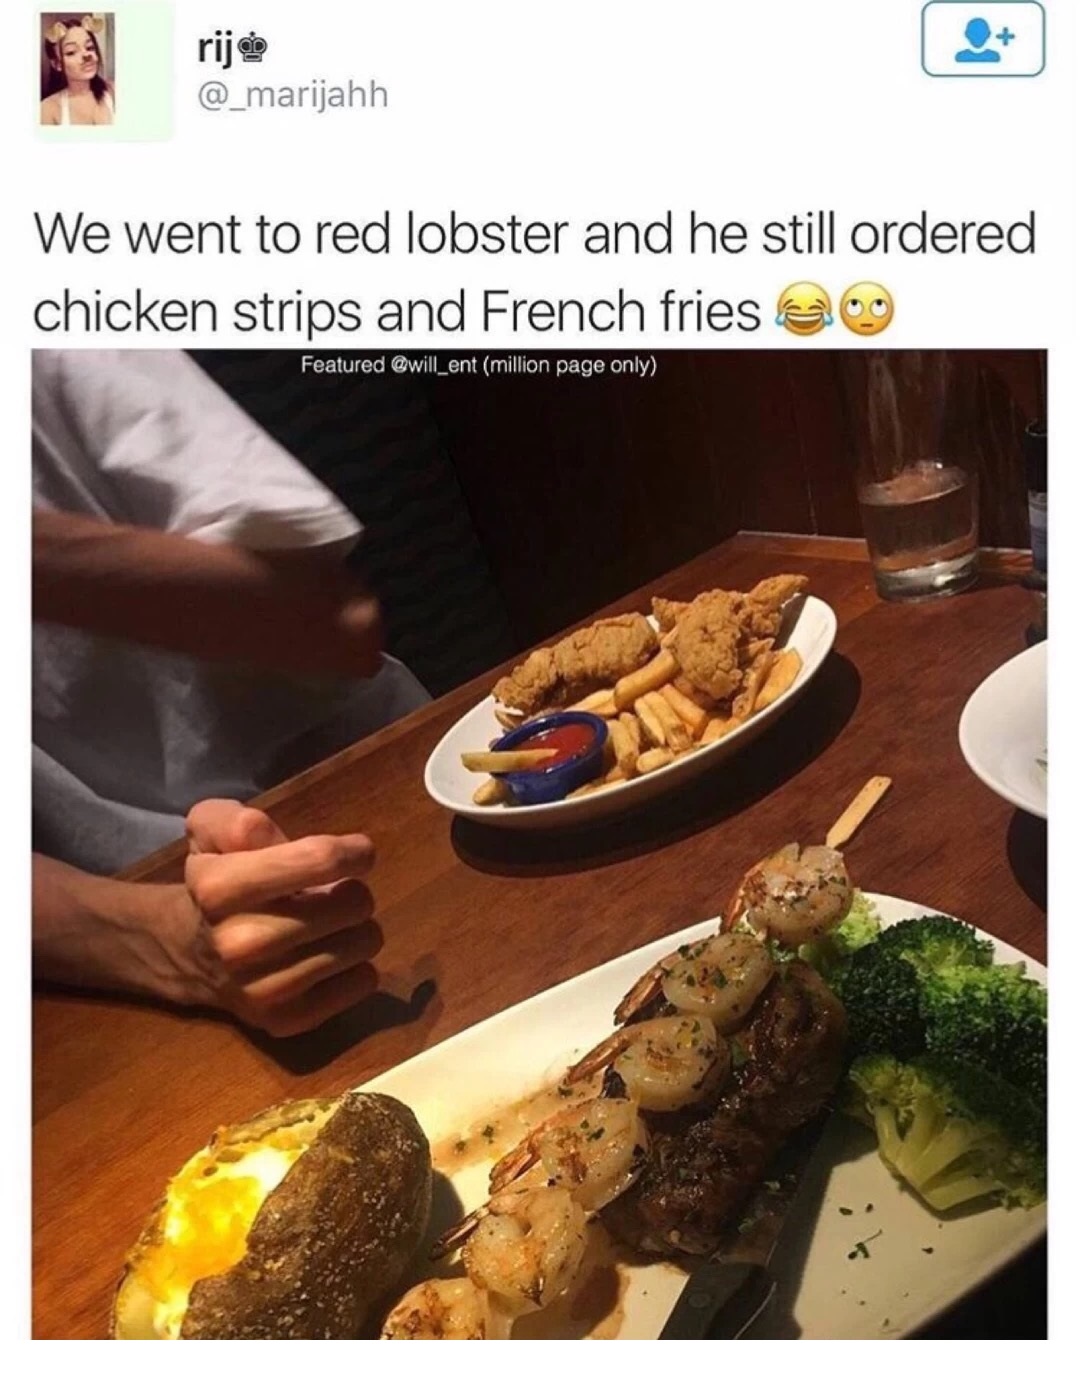 red lobster chicken strips meme - We went to red lobster and he still ordered chicken strips and French fries @ 09 Featured million page only